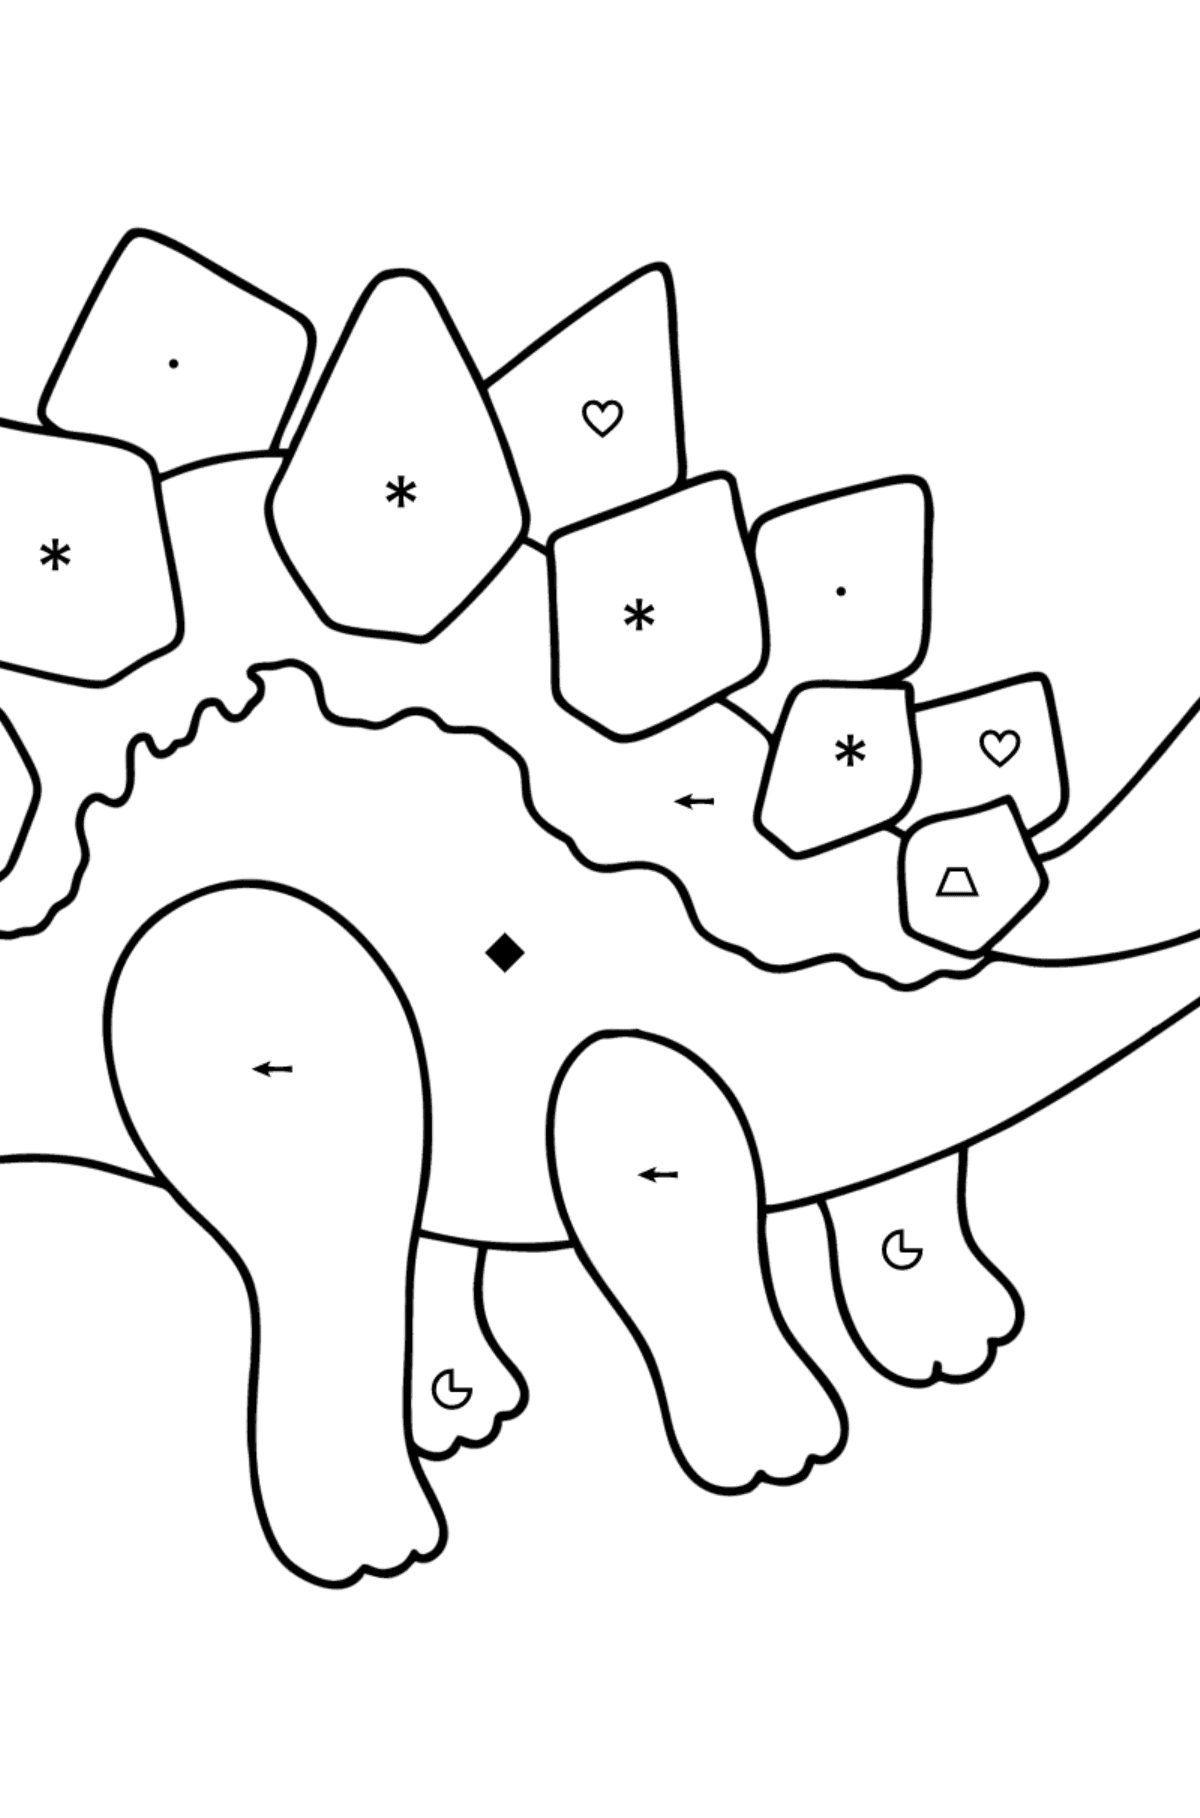 Stegosaurus coloring page - Coloring by Symbols and Geometric Shapes for Kids